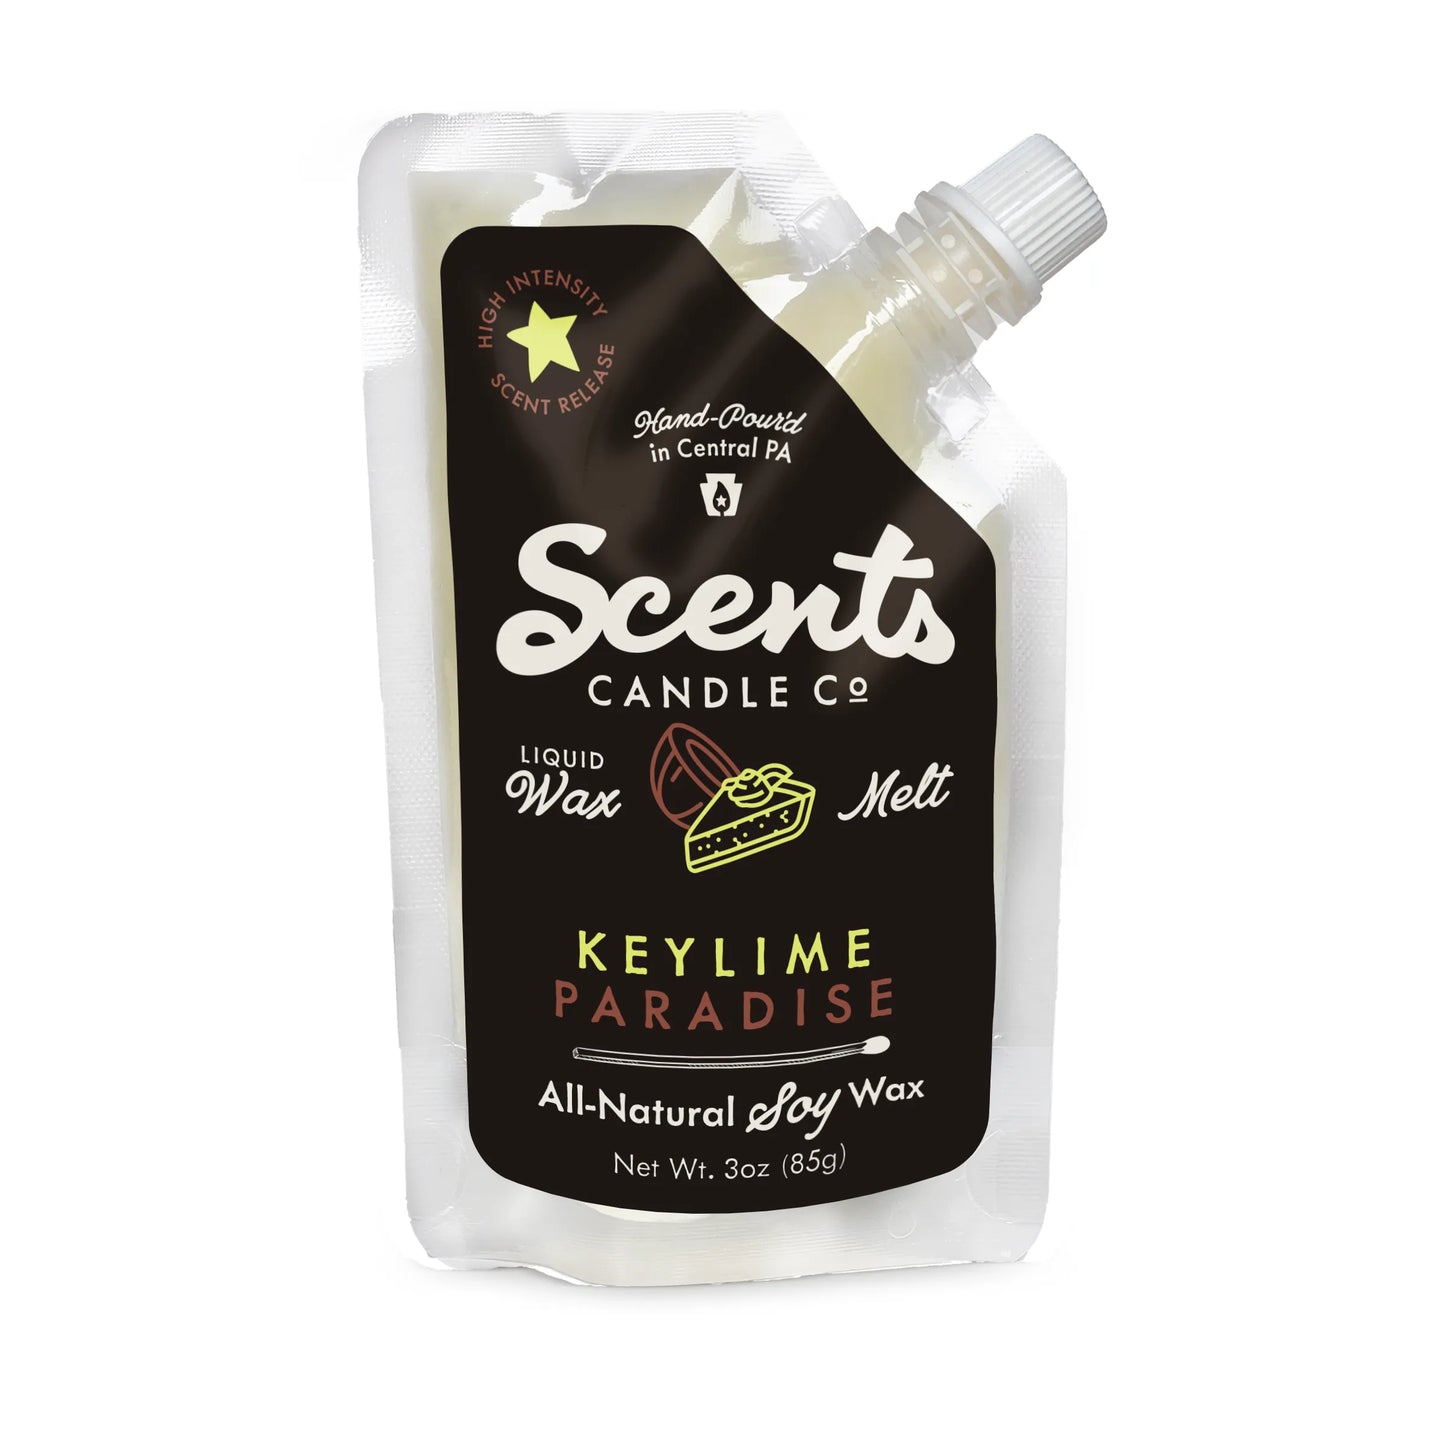 Keylime Paradise Squeeze Wax by Scents Candle Co.